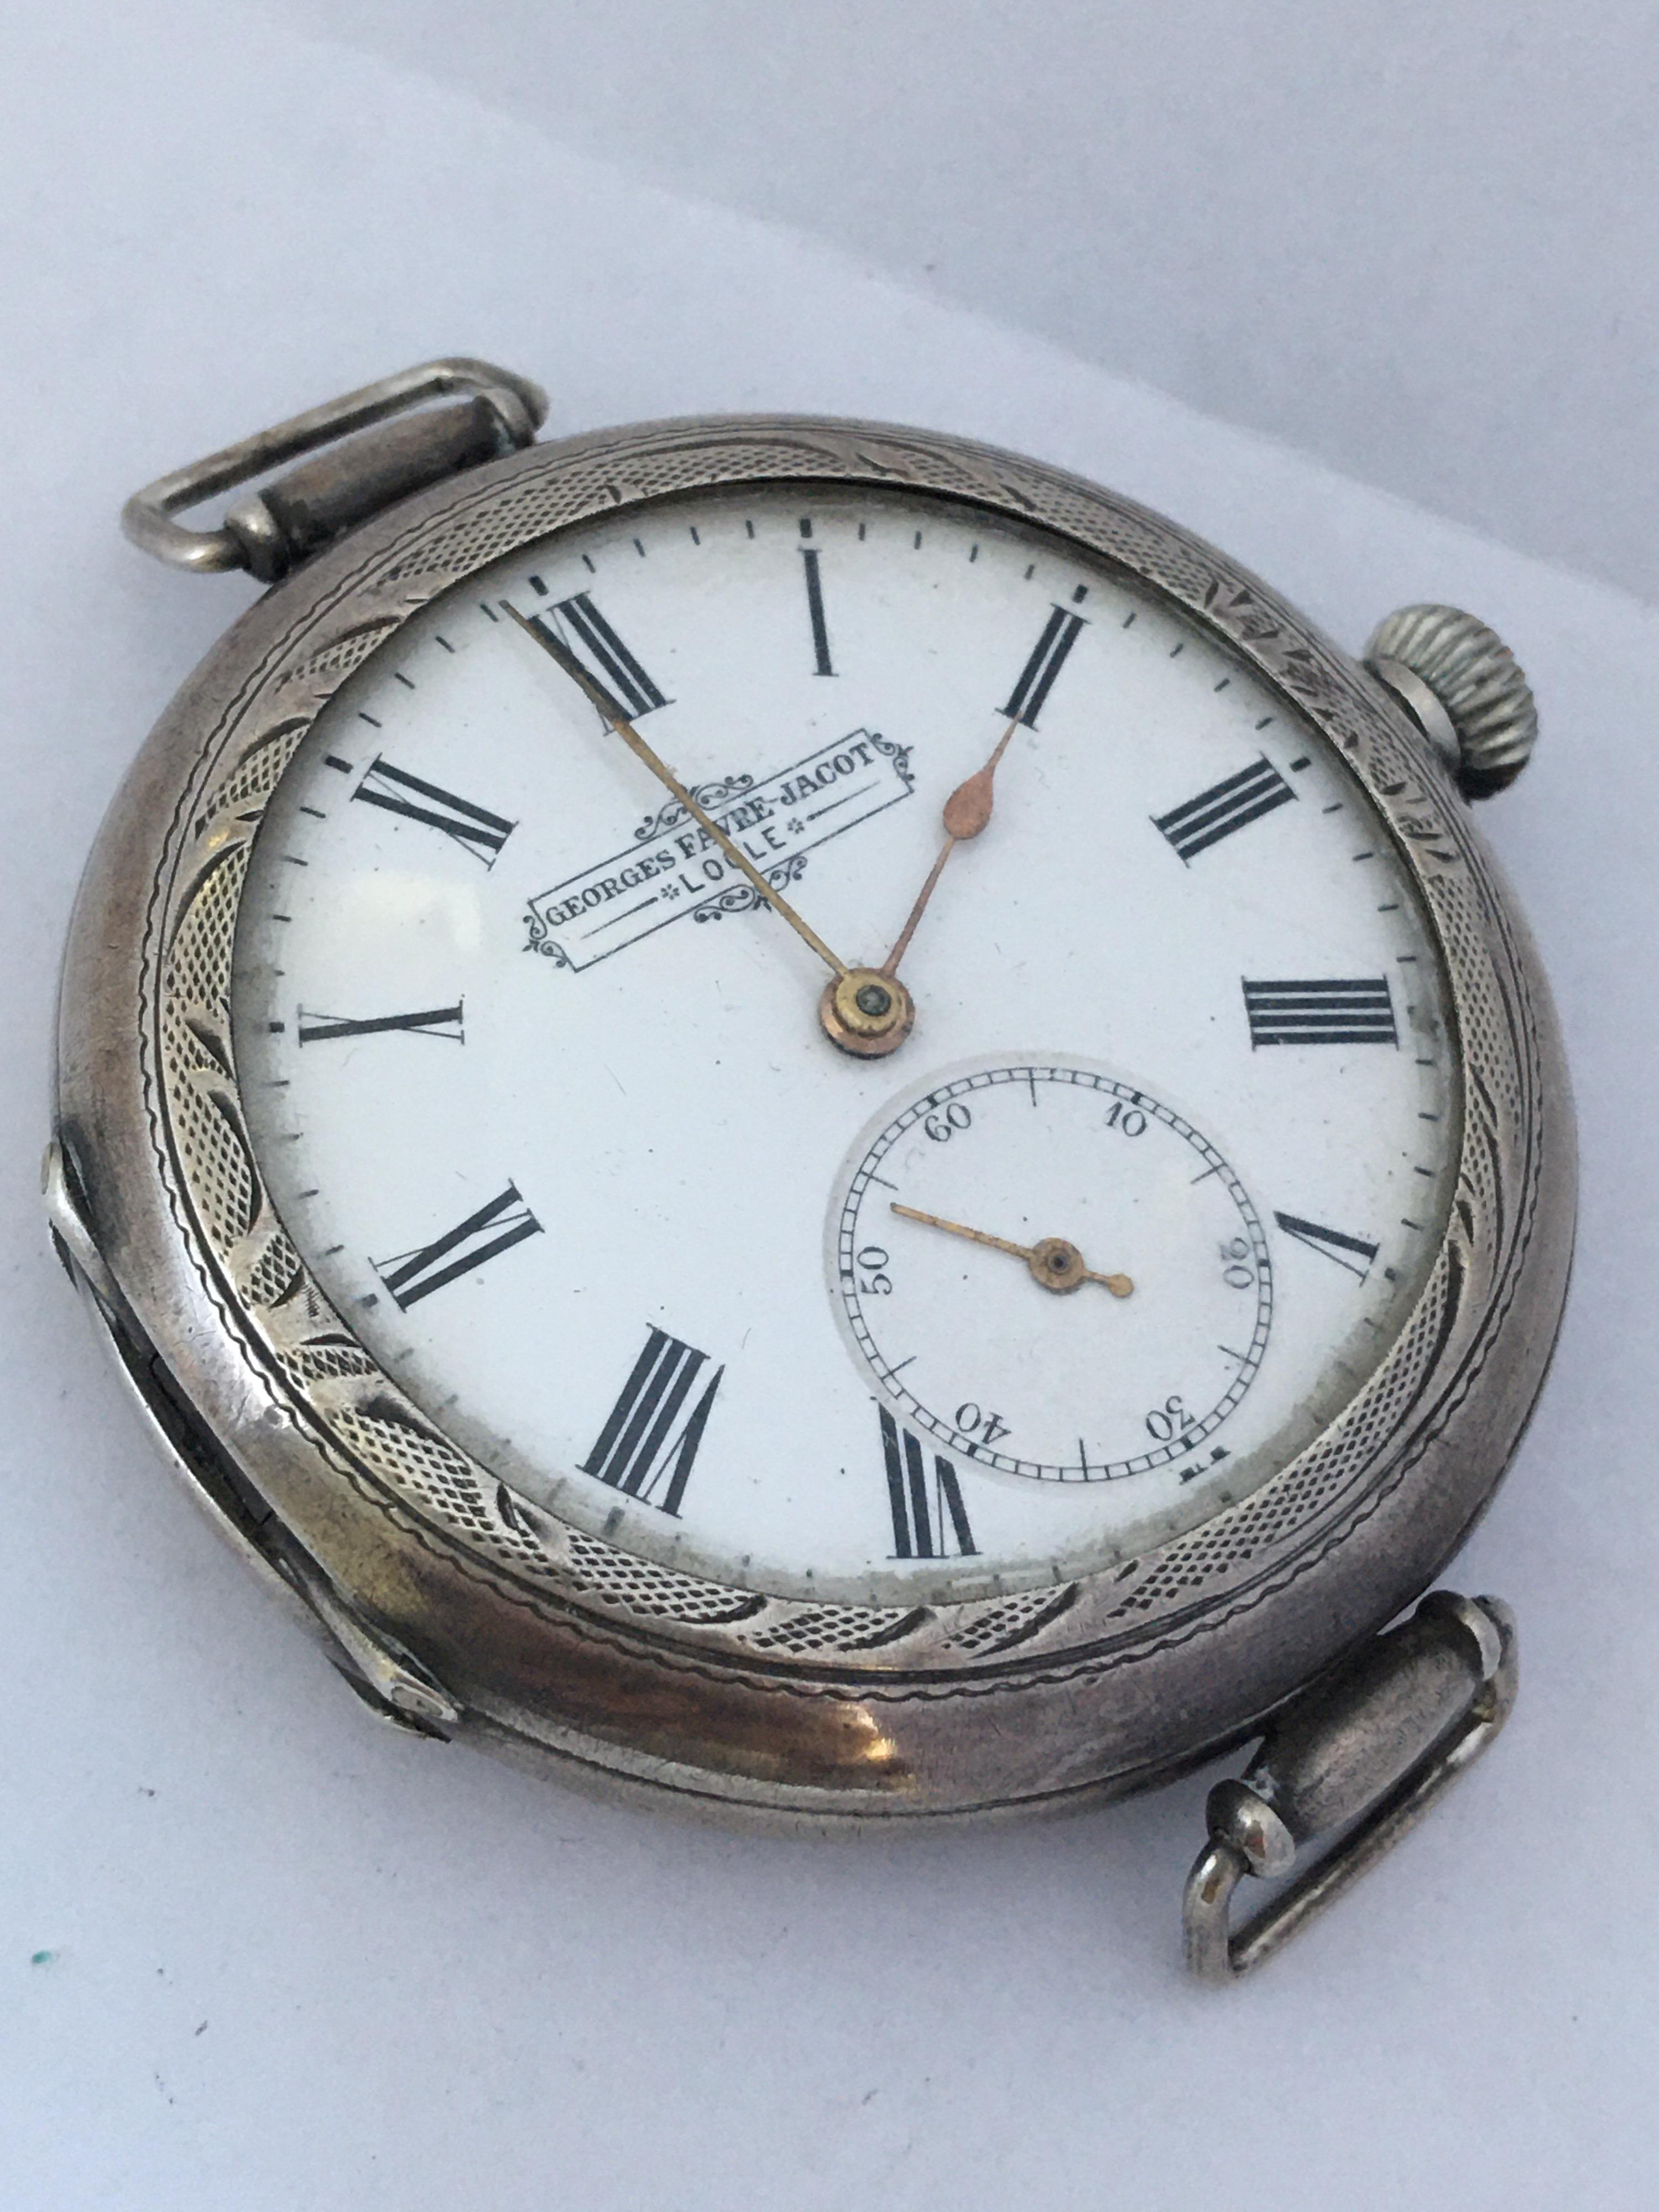 Rare Antique Unusual Hand-Winding Trench Watch Signed Georges Favre-Jacot 7